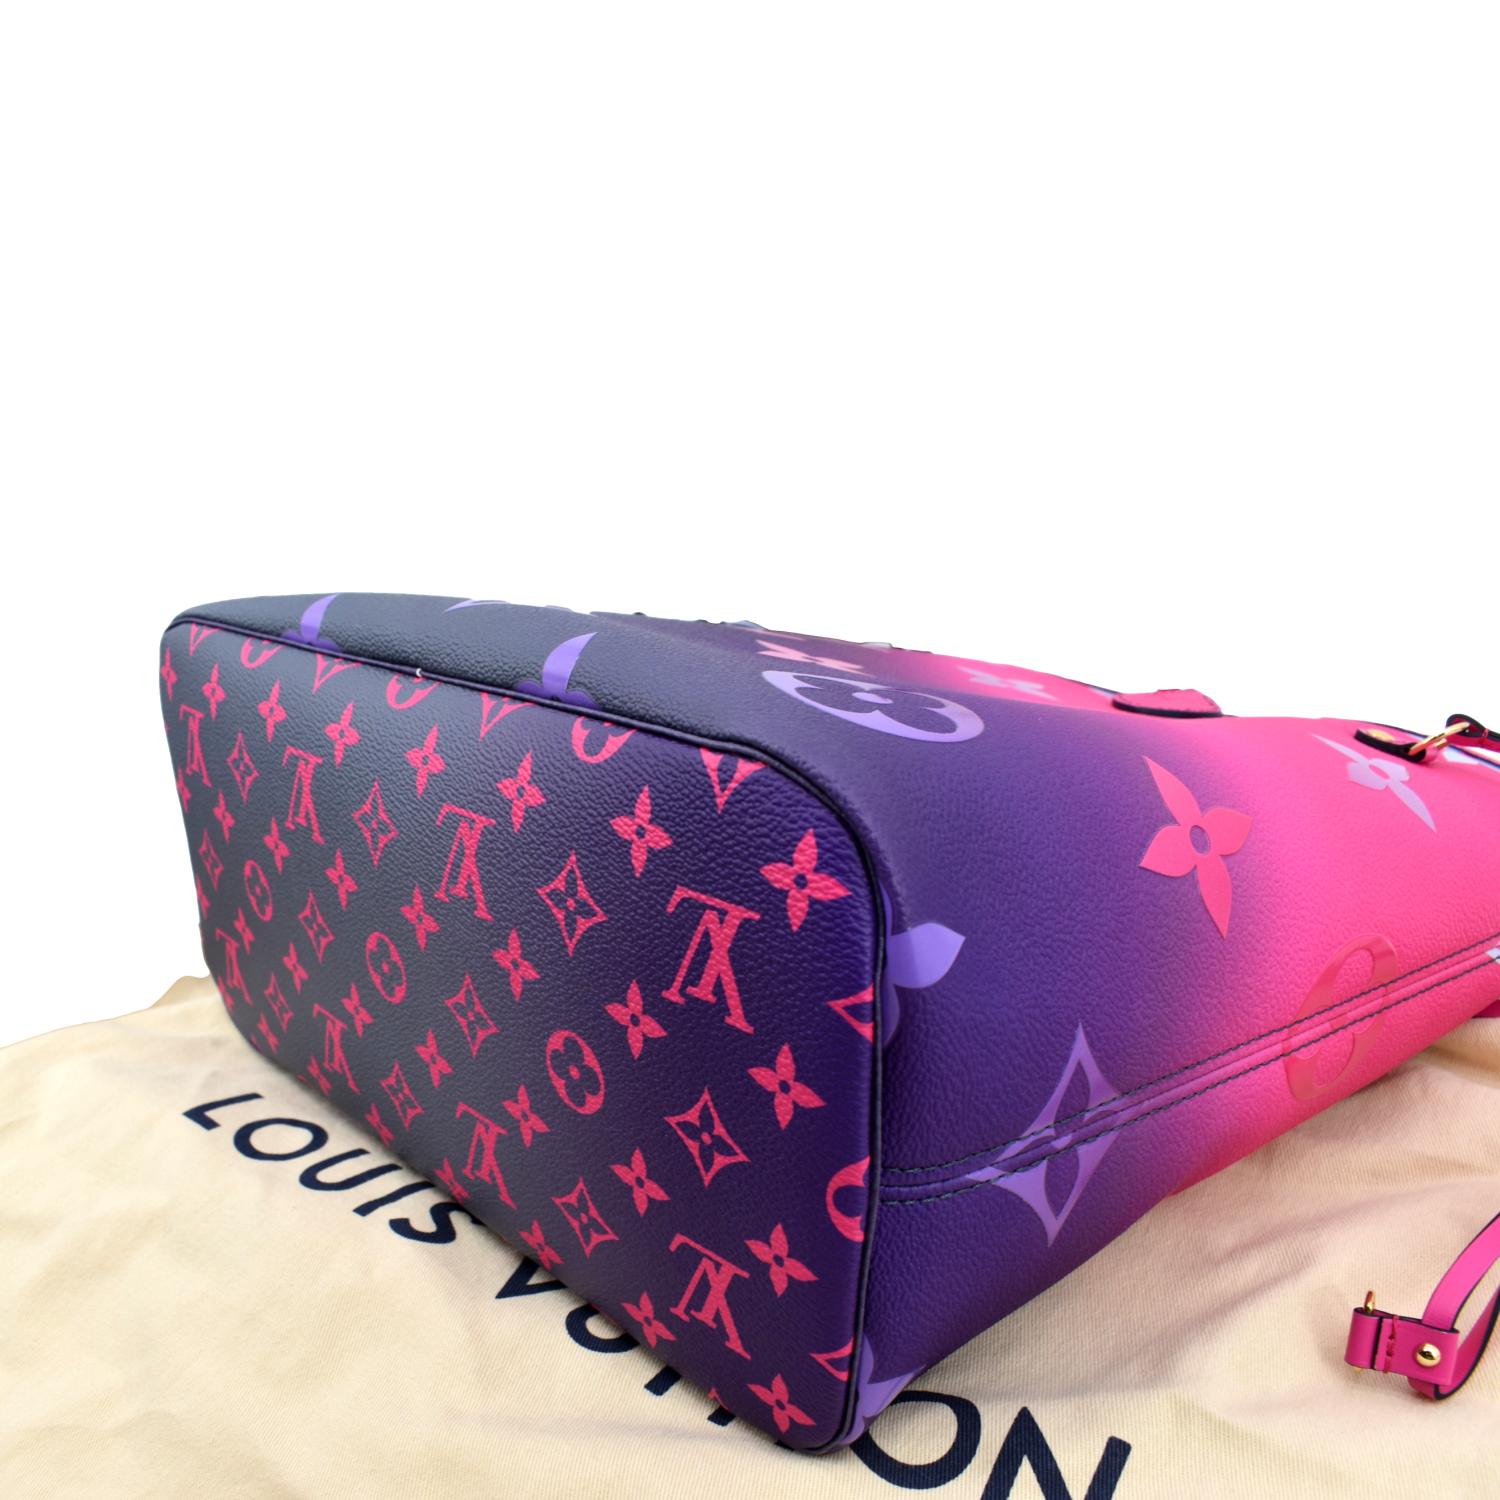 Louis Vuitton Monogram Midnight Fuchsia Neverfull MM Tote with Pouch  44lk511s